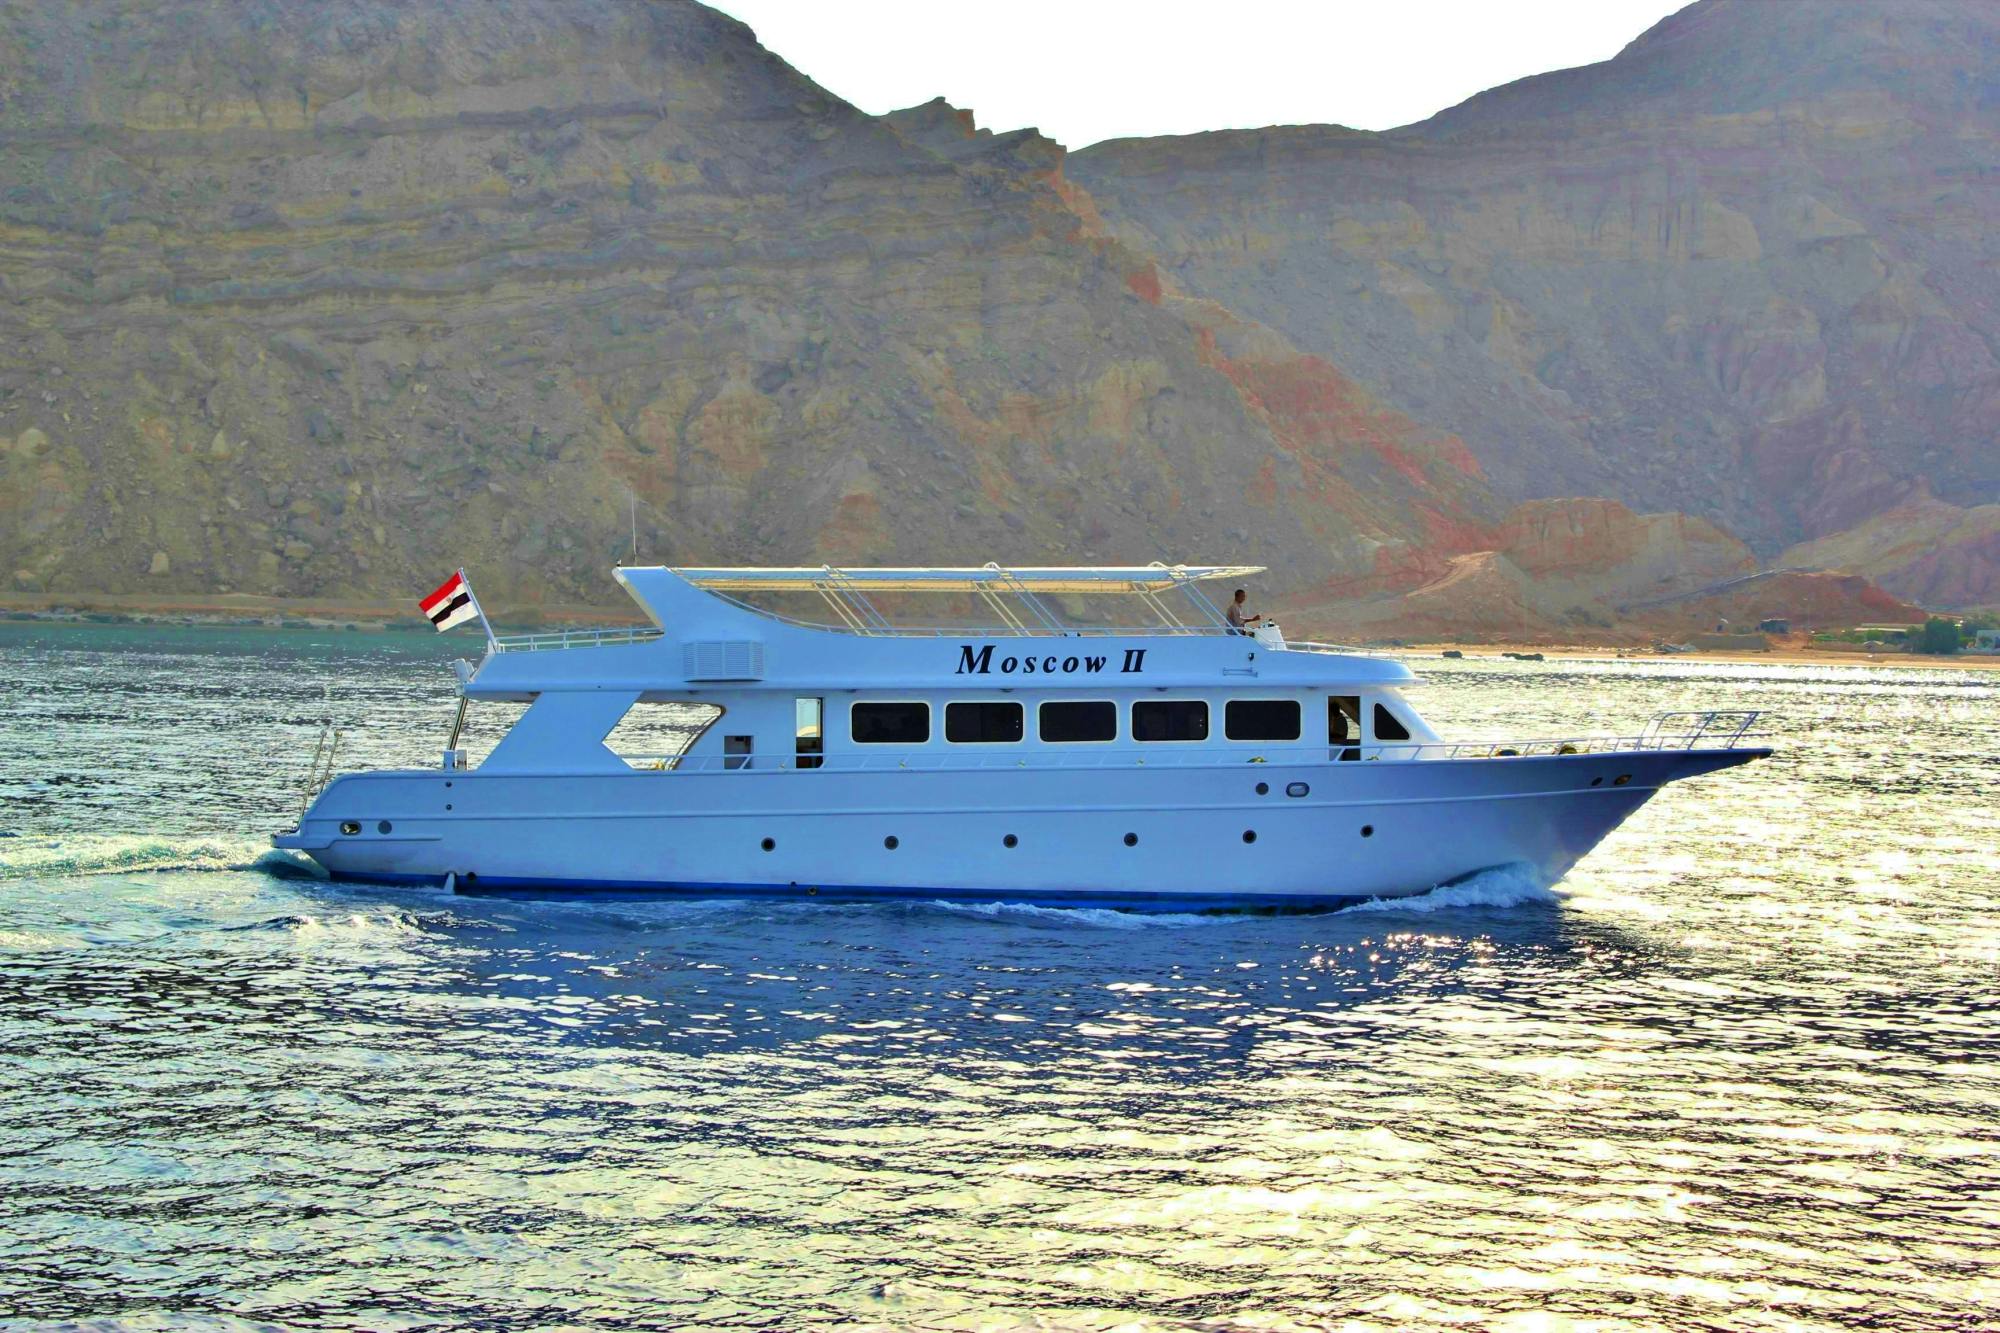 Submarine and snorkeling fun in Dahab from Sharm Musement